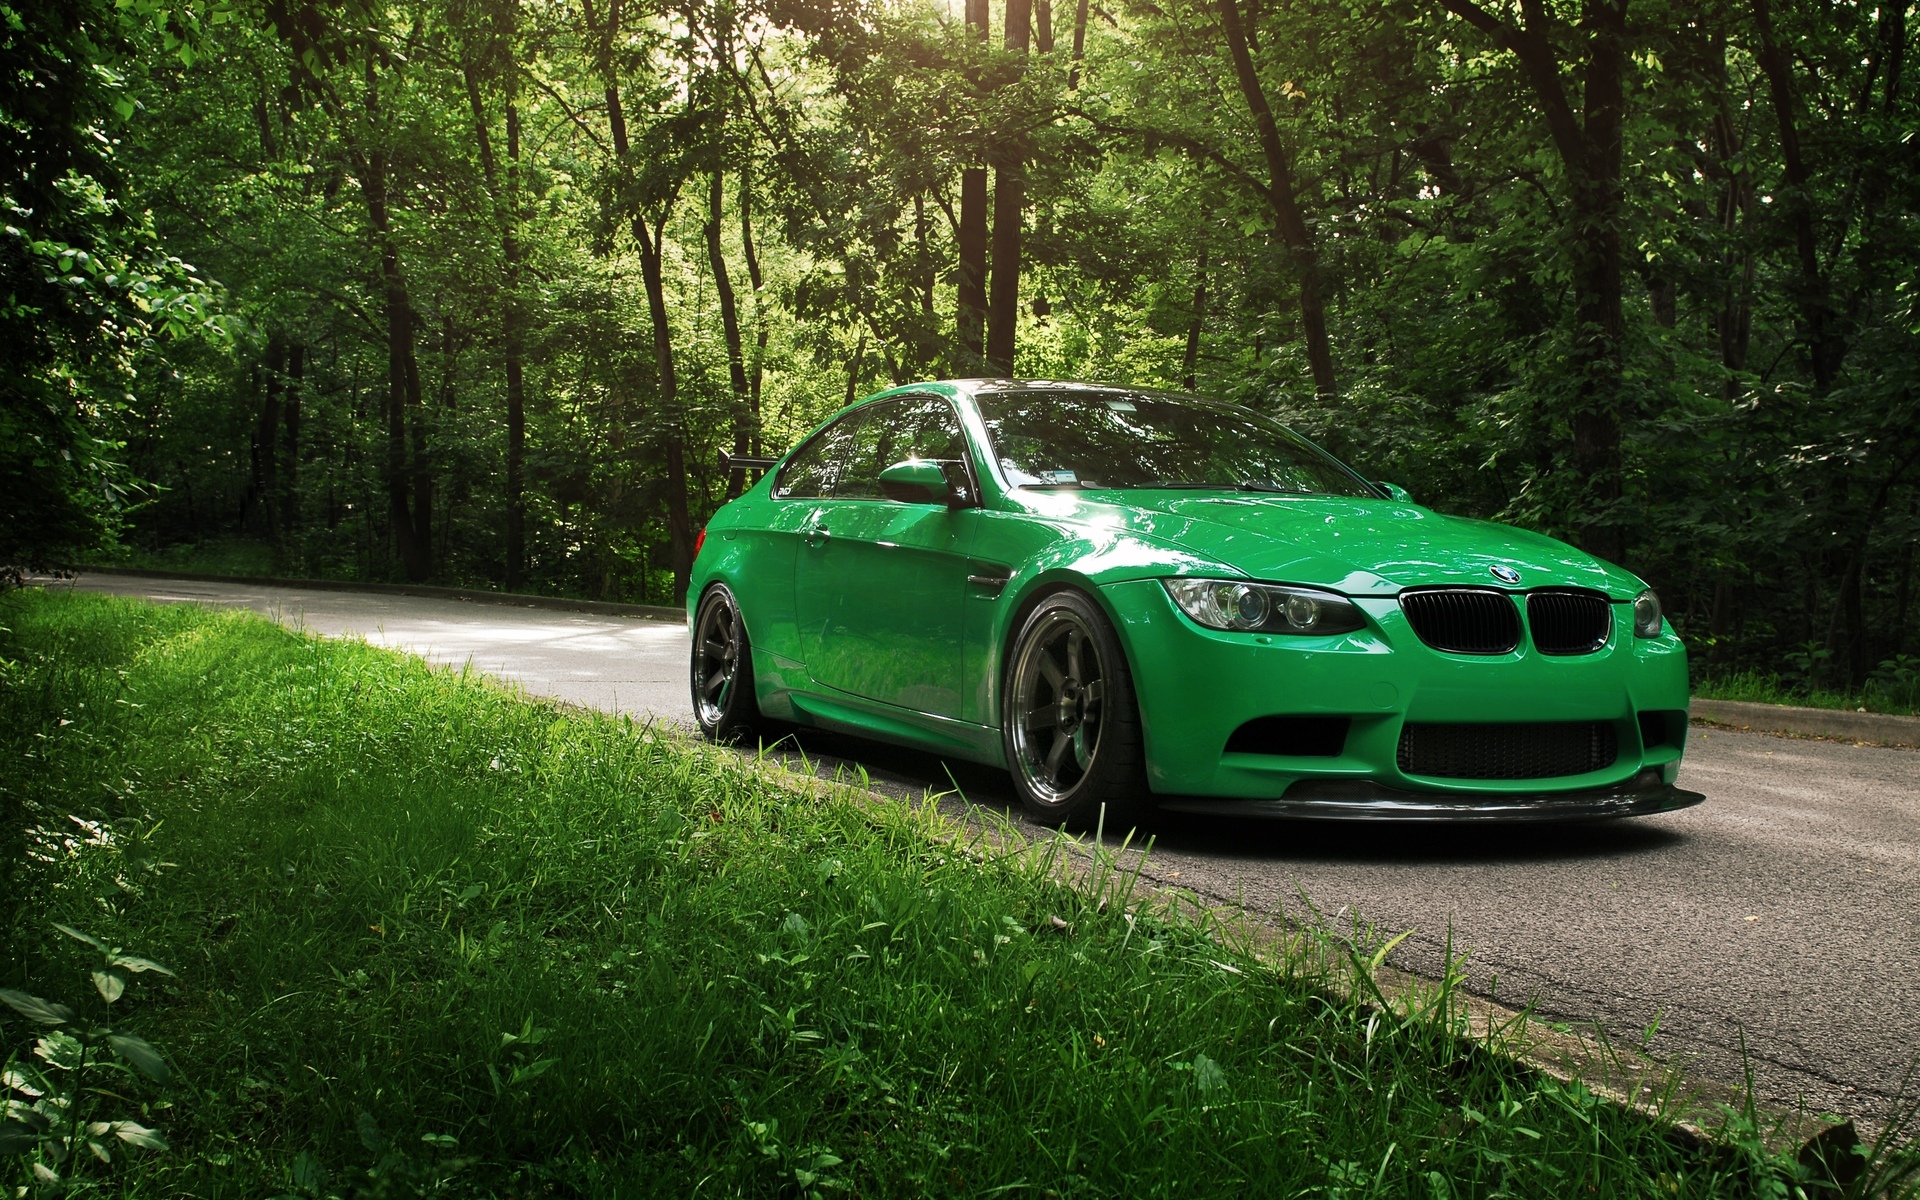 bmw, Vehicles, Cars, Auto, Tuning, Wheels, Roads, Trees, Forest, Nature, Grass, Green, Stance Wallpaper